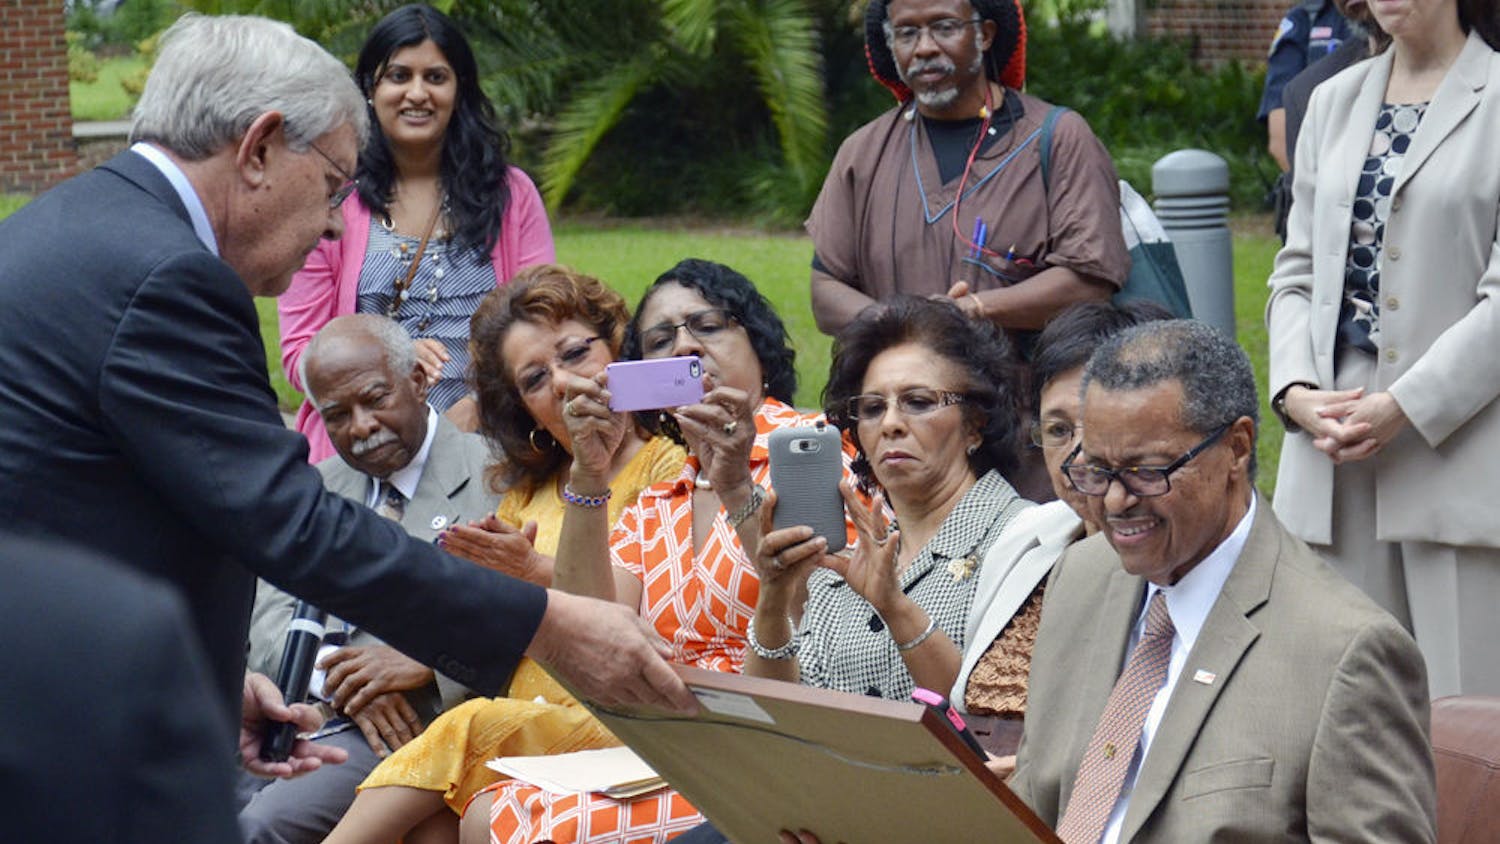 Judge Stephan P. Mickle, the first African-American to get a bachelor’s degree from UF and the second to graduate from UF’s Levin College of Law, smiles as he receives a plaque from George Dawson, the law school’s interim dean, during a tree dedication ceremony in 2015. About 75 people attended the ceremony on the UF Law West Courtyard.